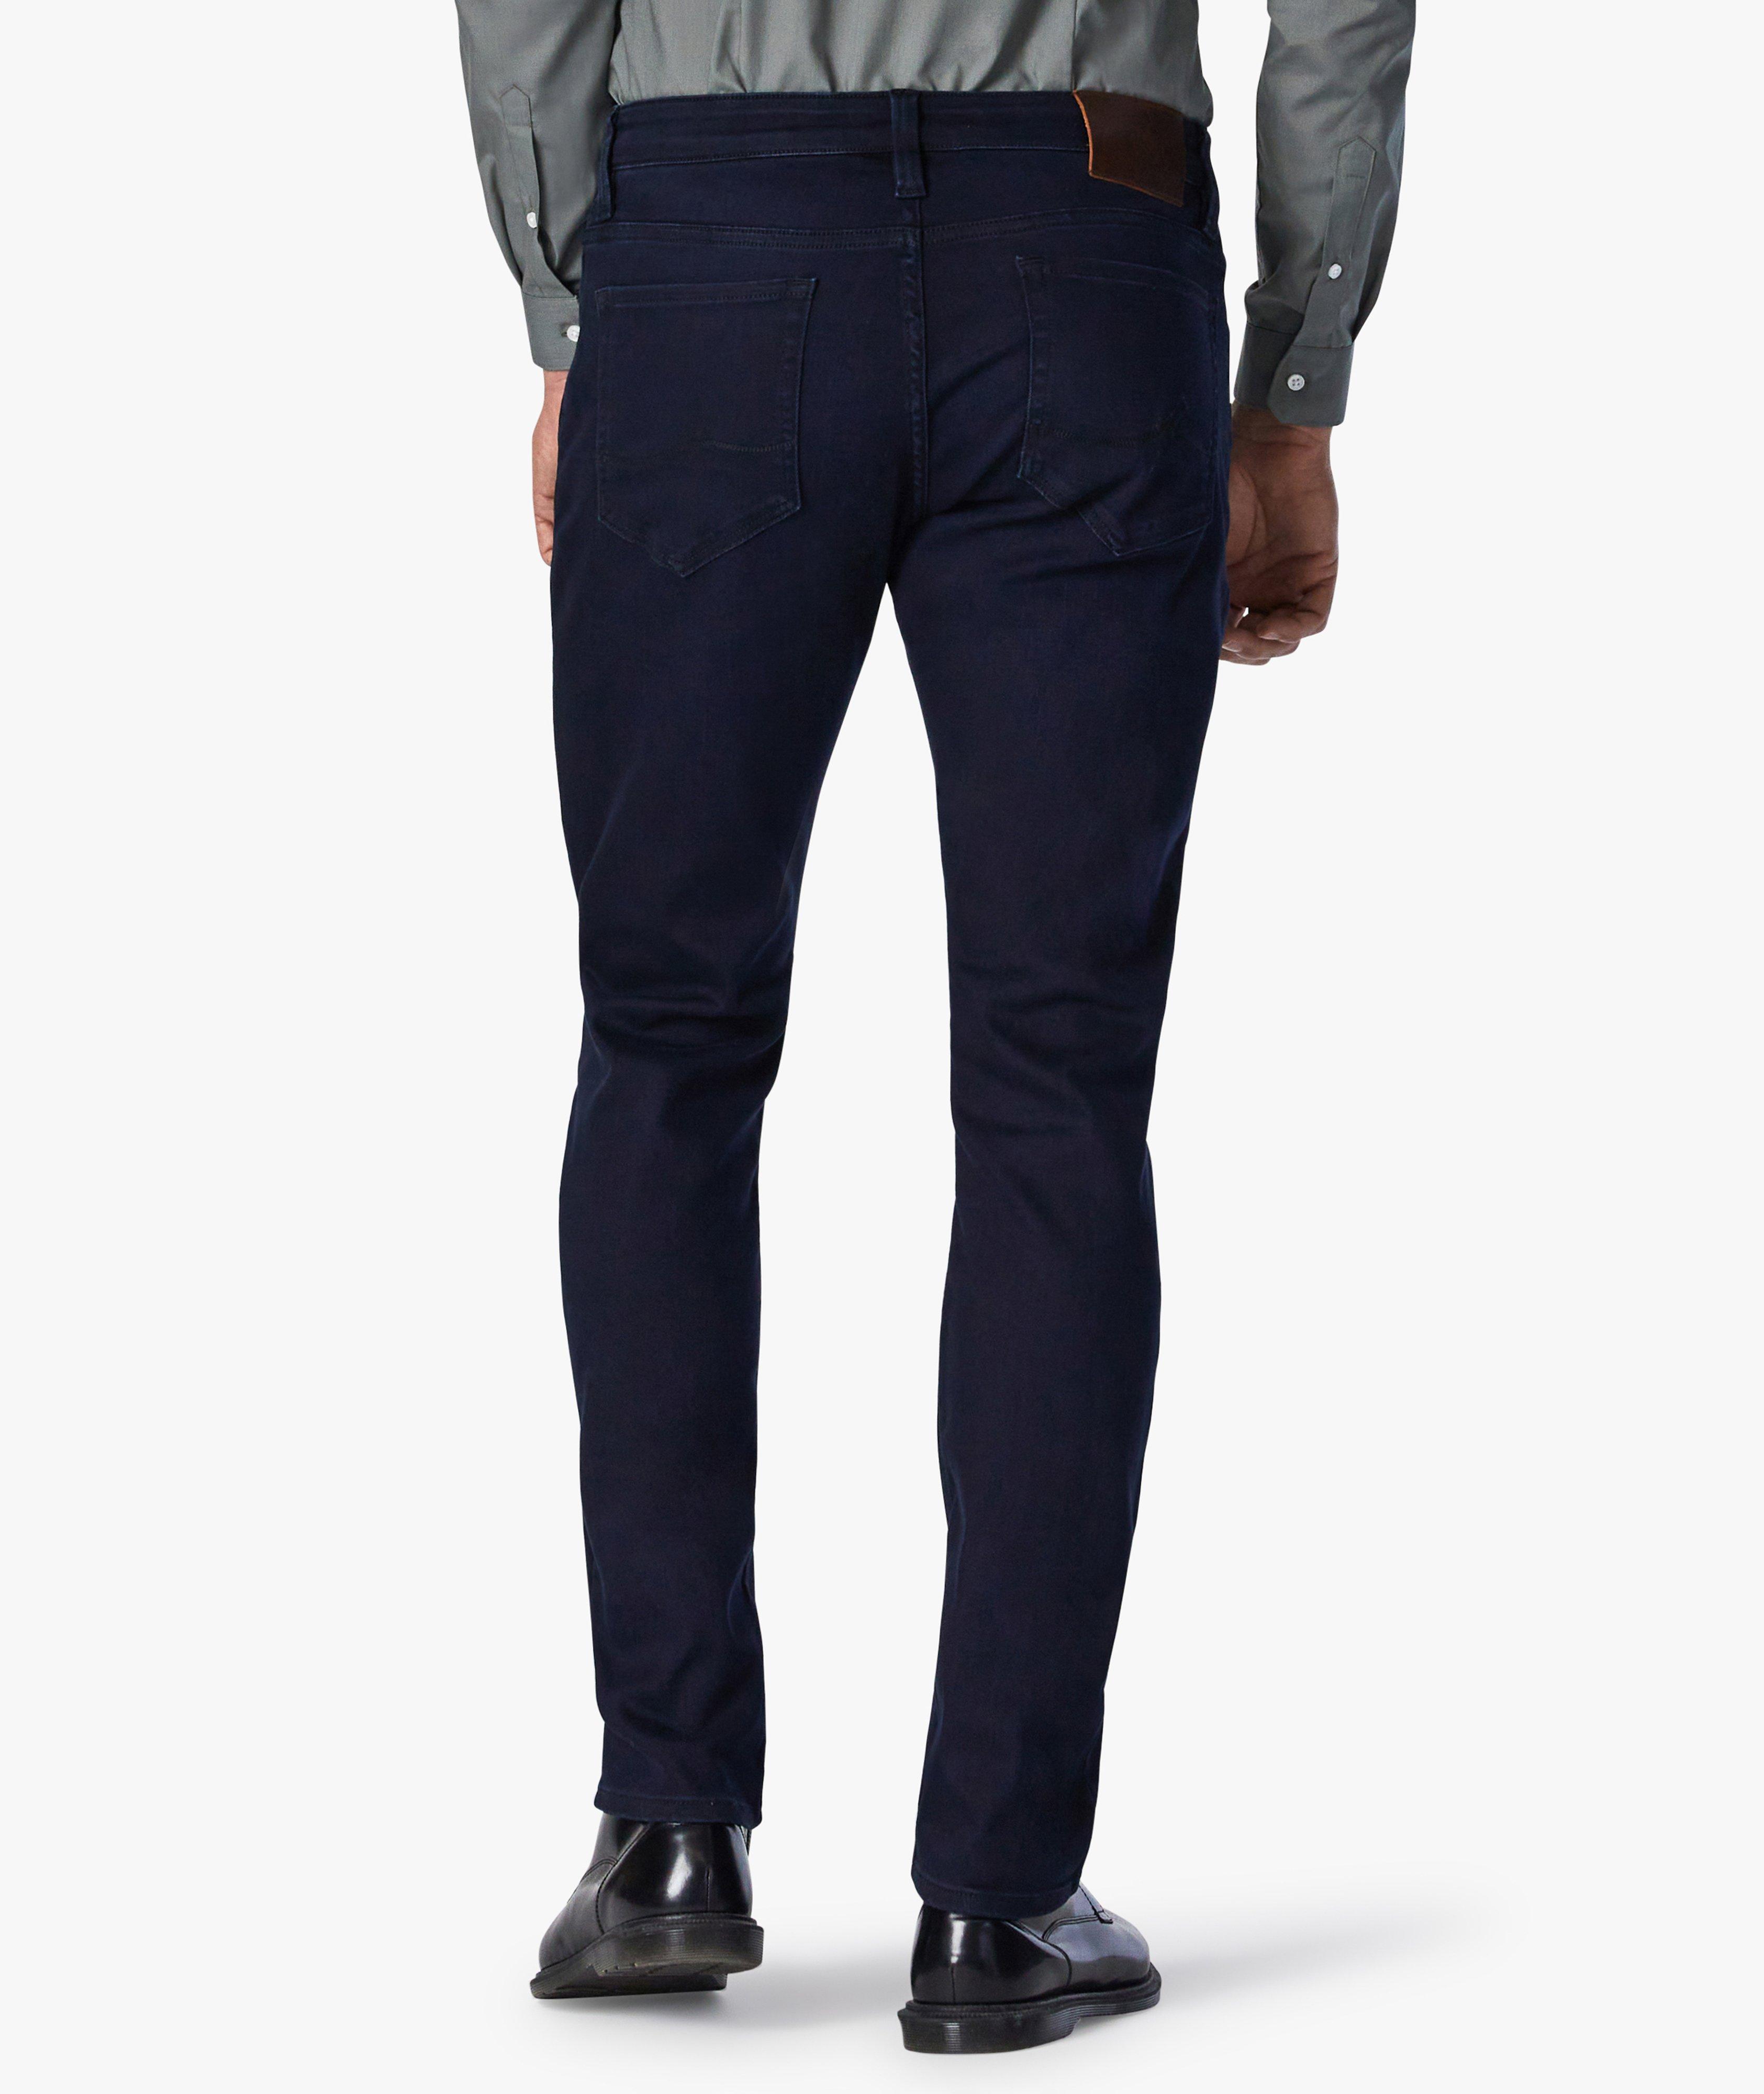 Cool Tapered Leg Jeans image 2